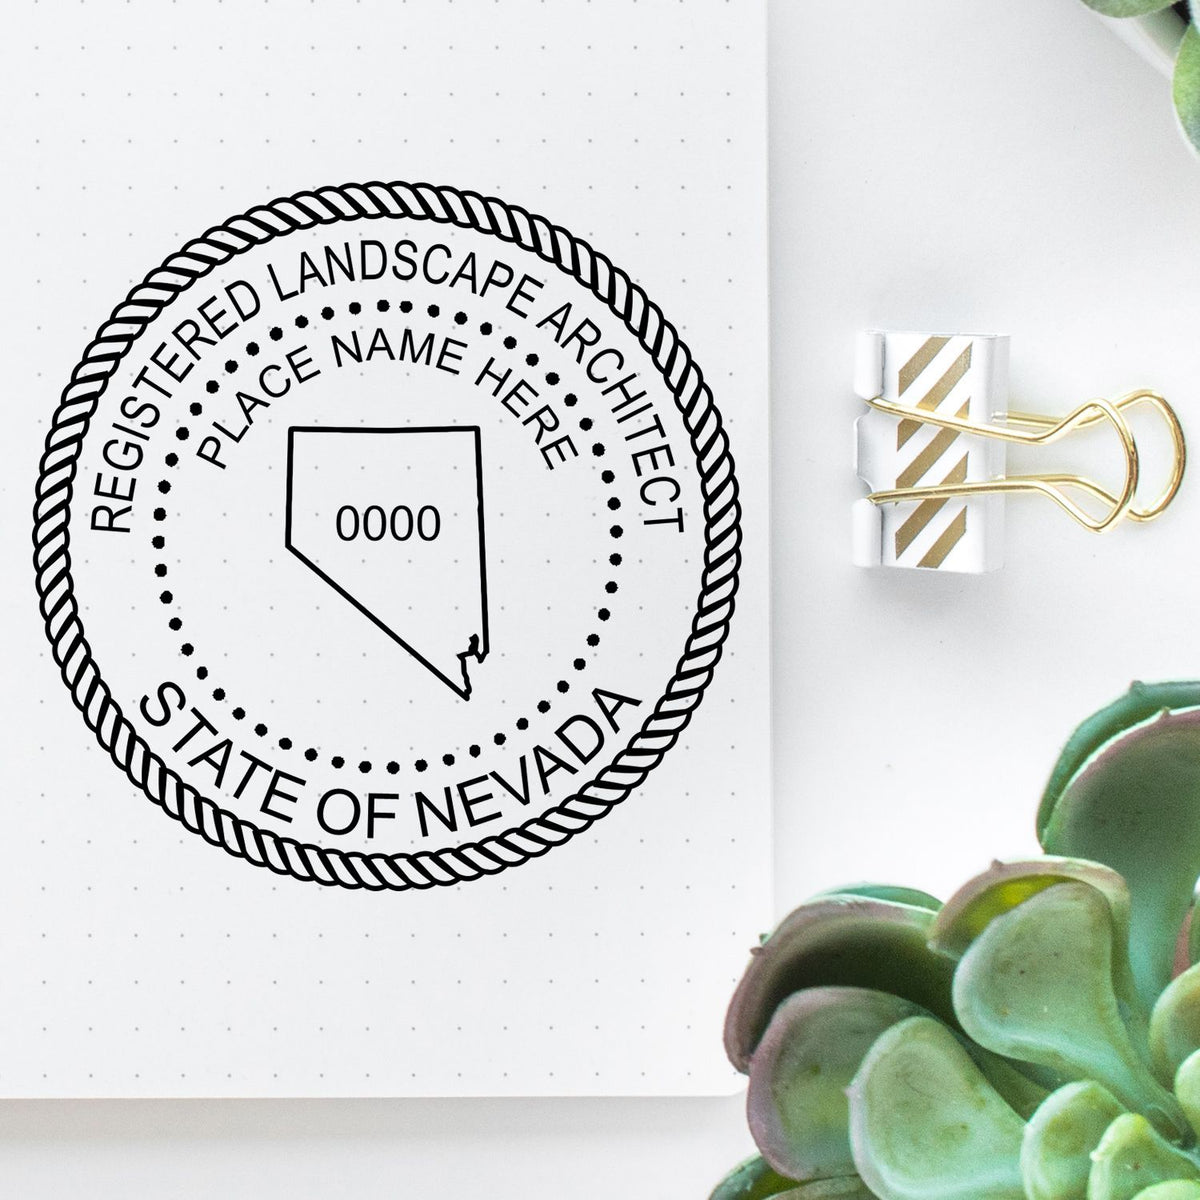 This paper is stamped with a sample imprint of the Slim Pre-Inked Nevada Landscape Architect Seal Stamp, signifying its quality and reliability.